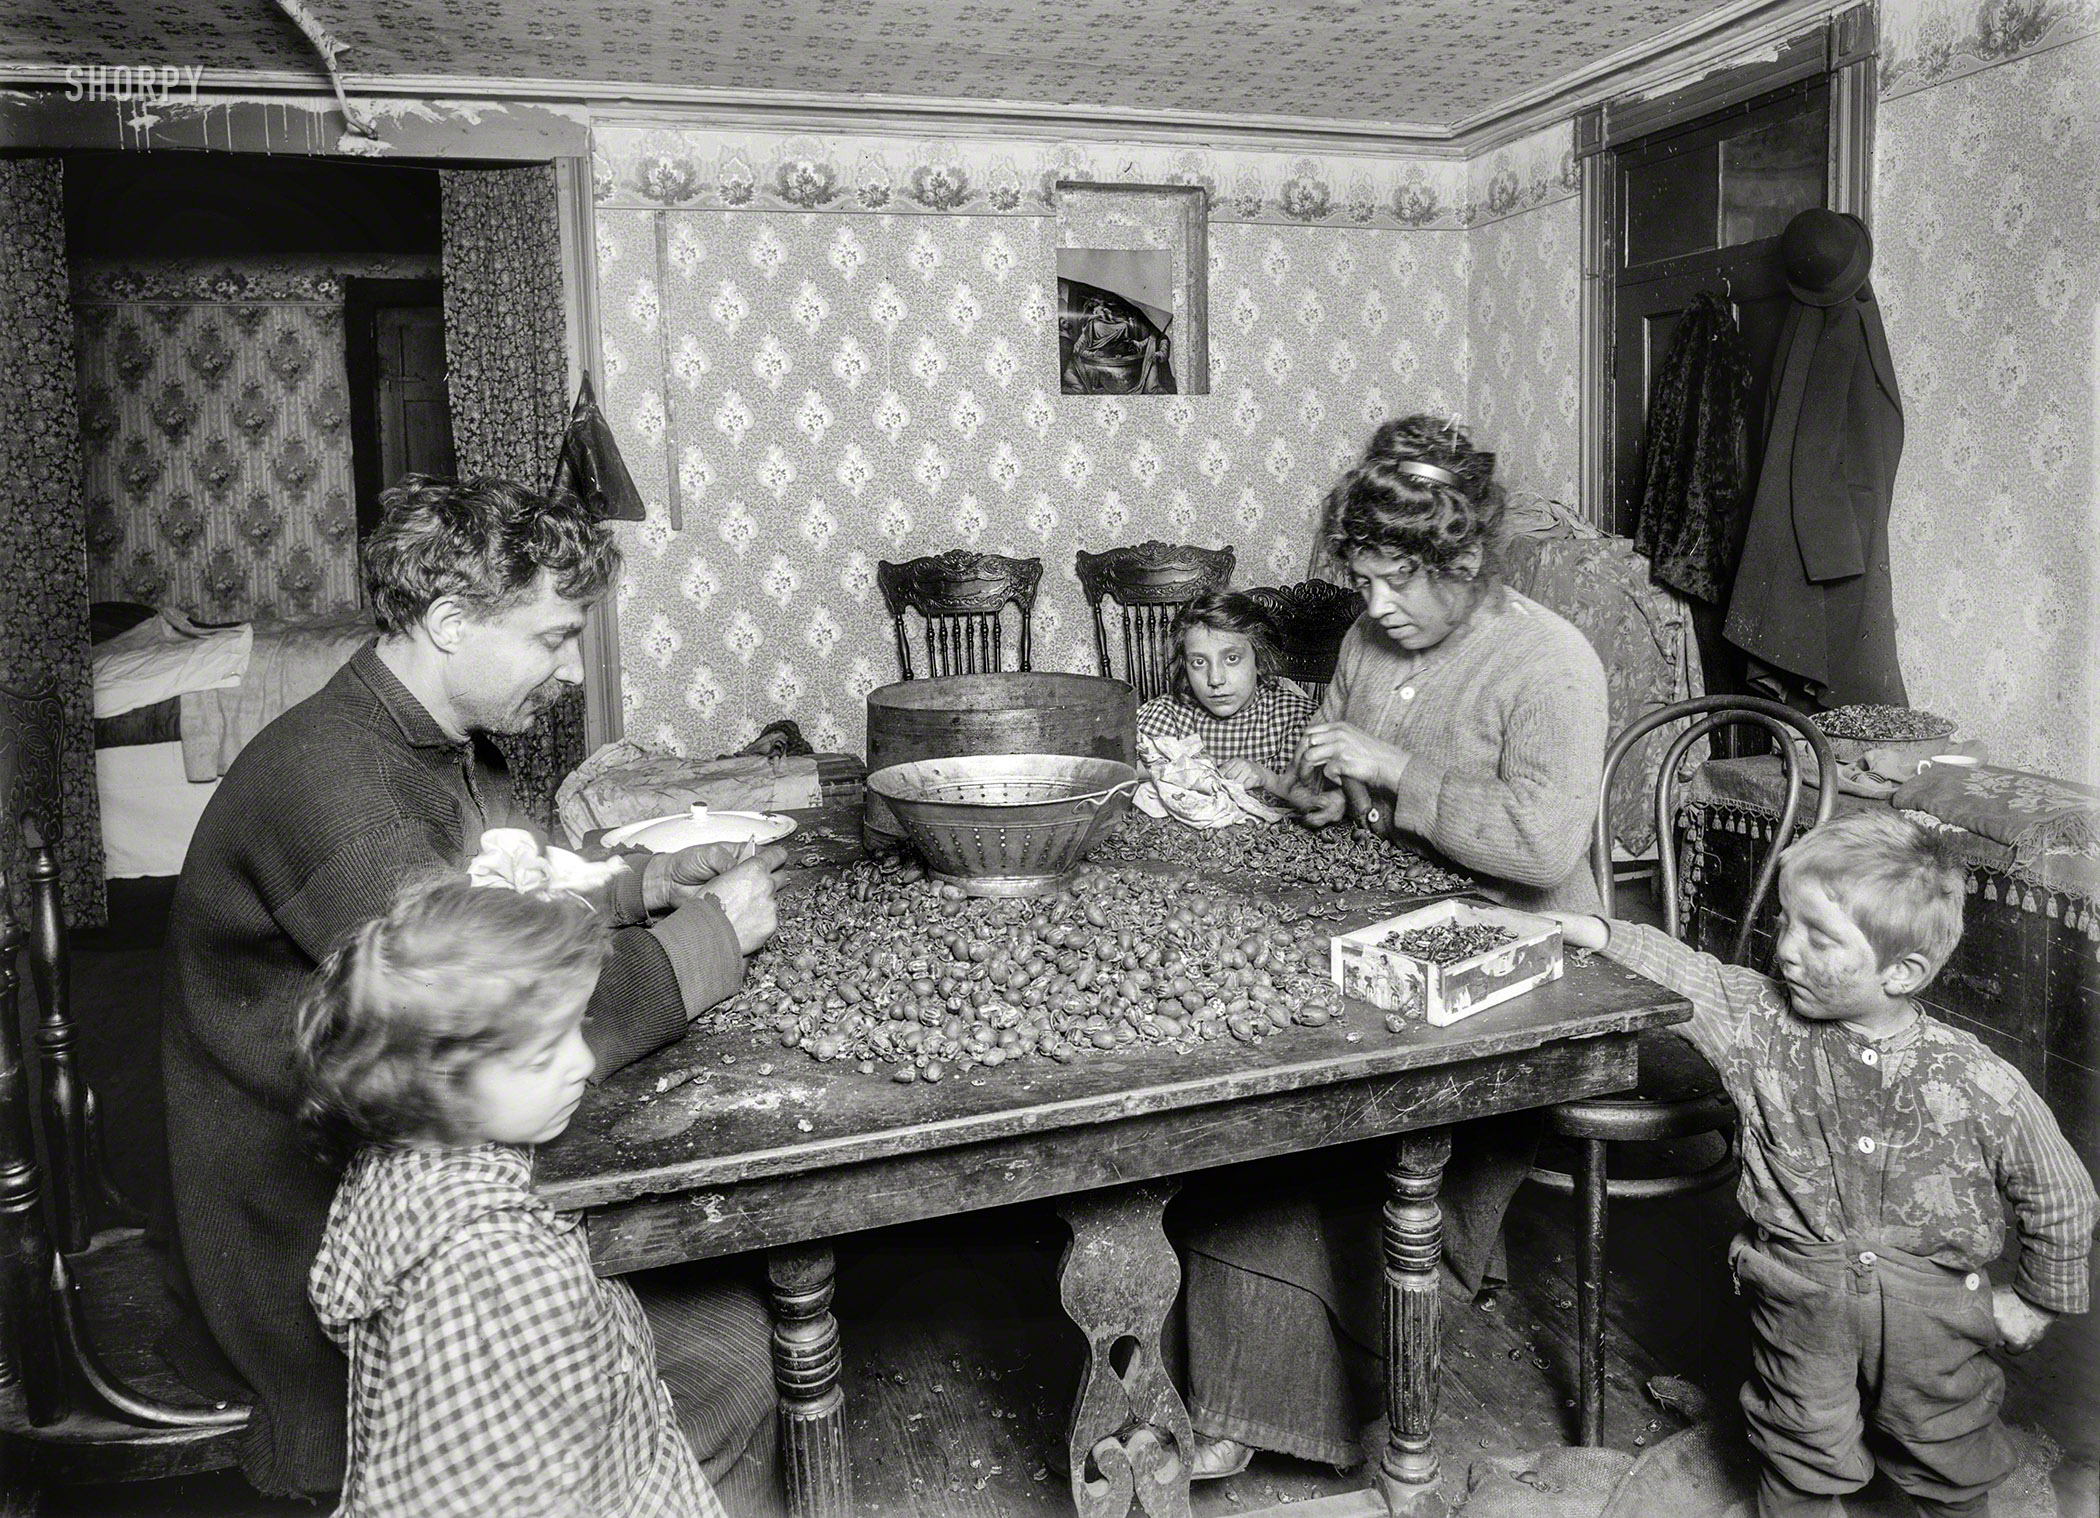 December 1911. "3:30 P.M. -- Picking nuts in dirty basement tenement, 143 Hudson Street, New York. The dirtiest imaginable children were pawing over the nuts, eating lunch on the table, etc. Mother had a cold, blew her nose frequently (without washing hands) and the dirty handkerchief reposed comfortably on the table and close to the nuts and nut meats. The father picks now -- 'No work to do at any business.' (Has a cobbler's shop in the room.) They said the children didn't pick near. (Probably a temporary respite.)" The Libertine family, seen earlier here. 5x7 inch glass negative by Lewis Wickes Hine. View full size.